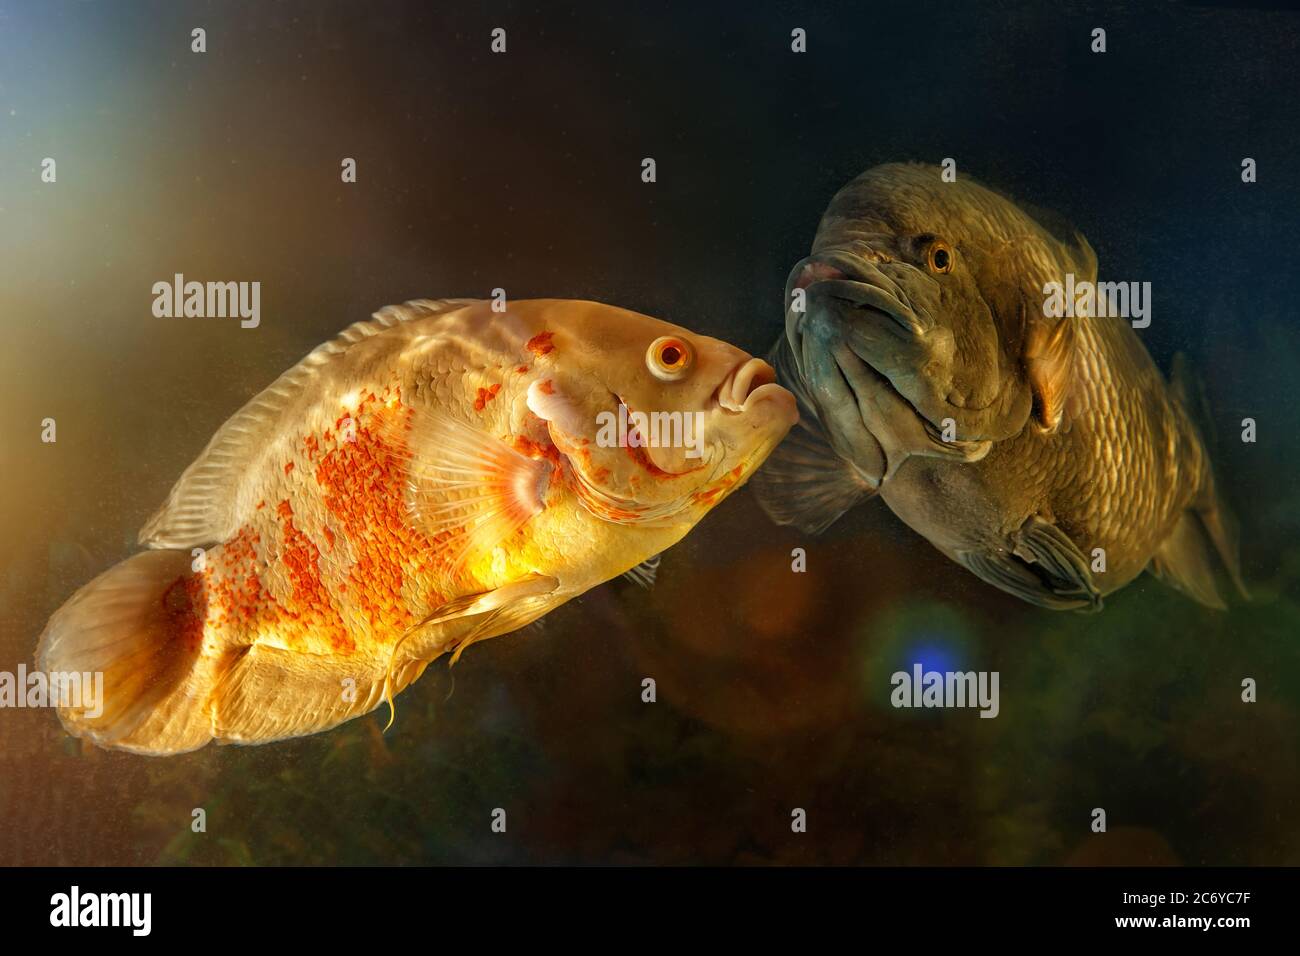 Dream fishing dvds hi-res stock photography and images - Alamy